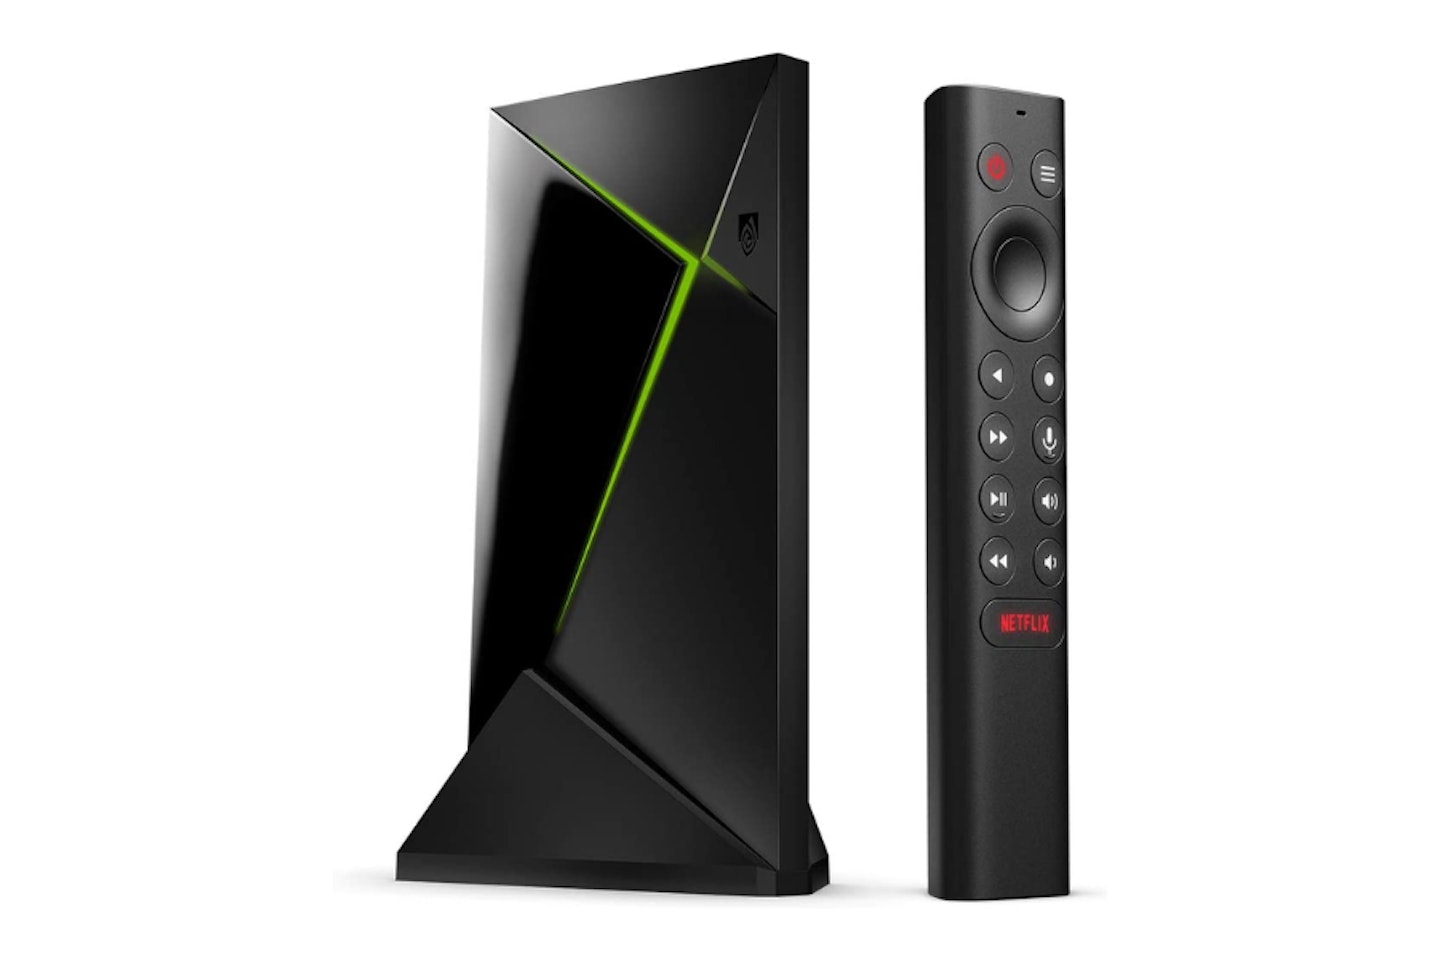 NVIDIA SHIELD Android TV Pro Streaming Media Player - possibly the Best Android TV box